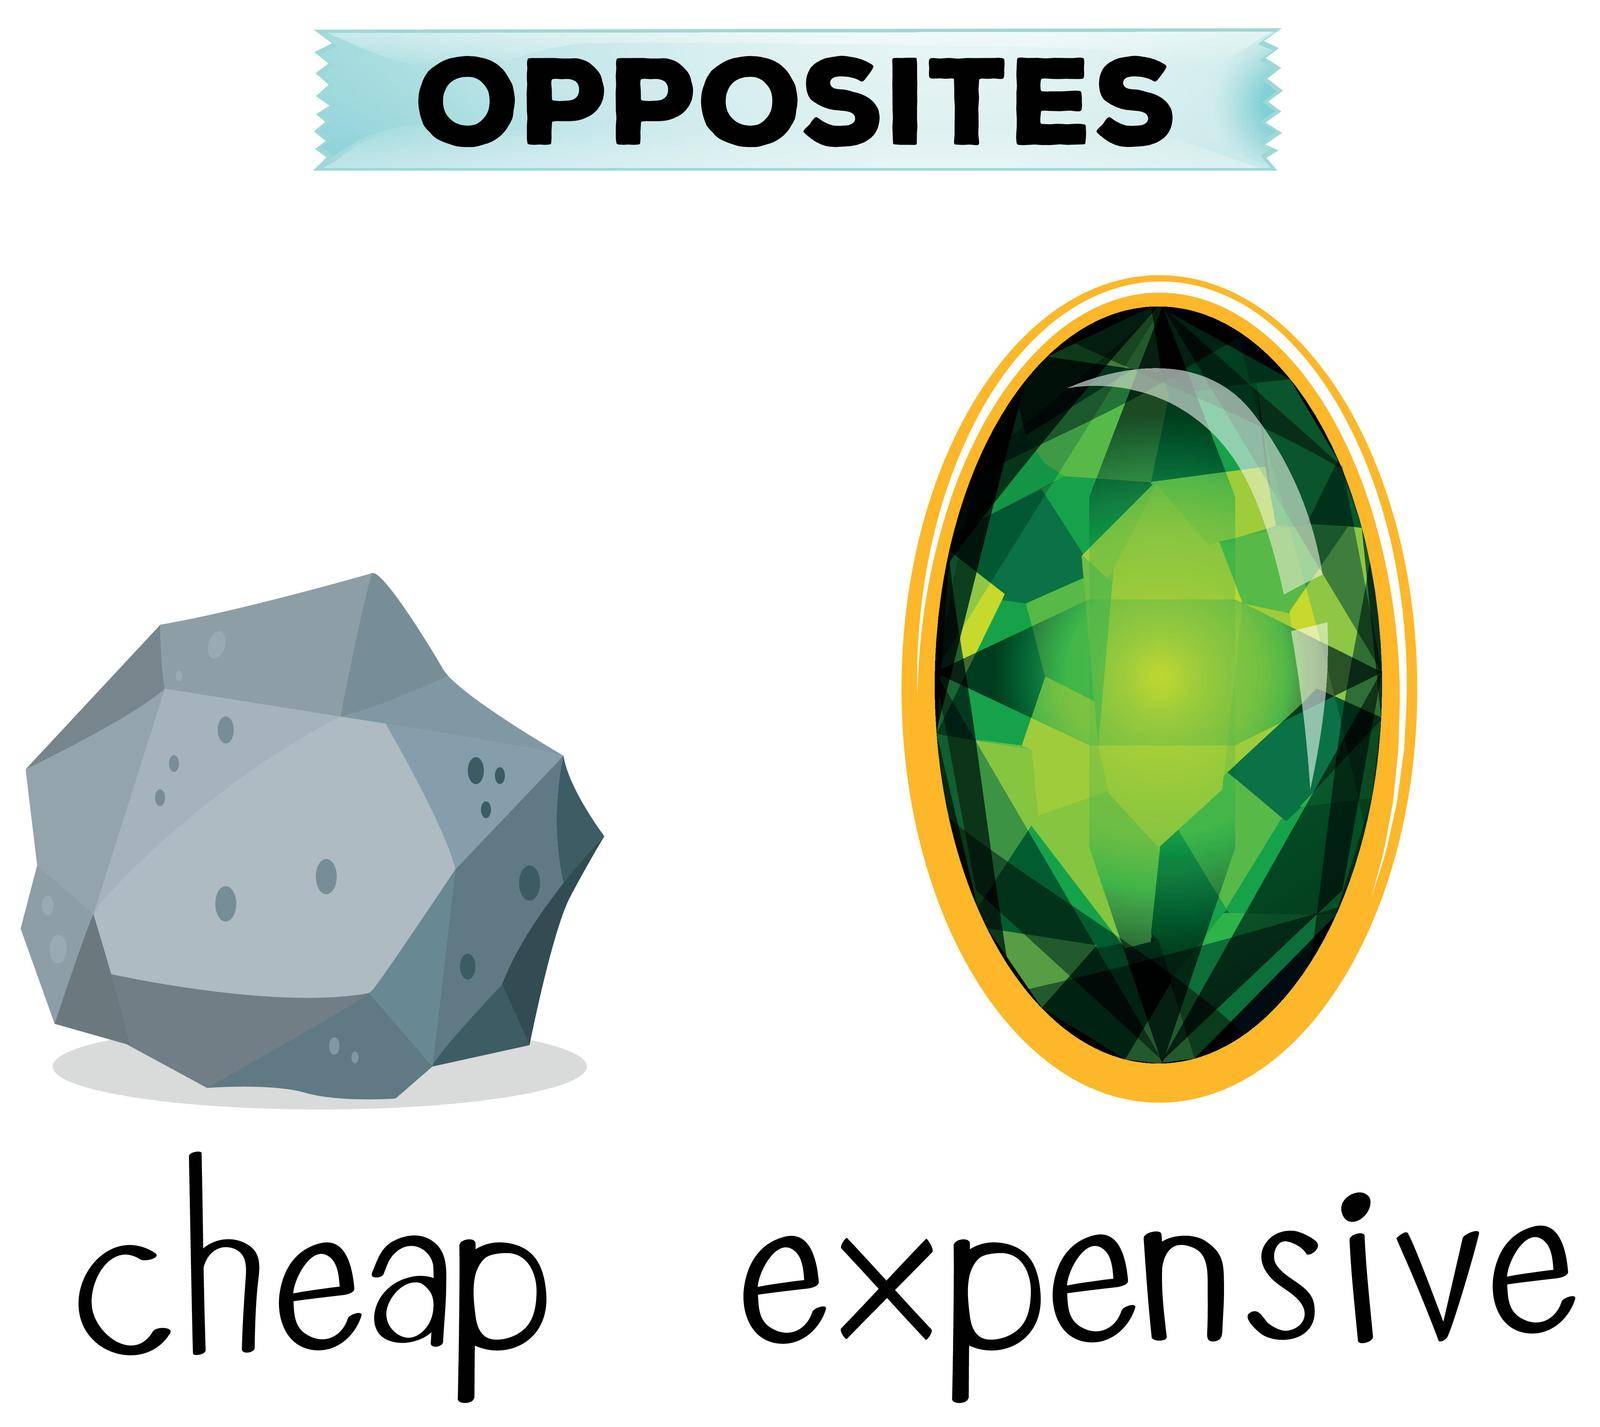 Opposite words for cheap and expensive illustration